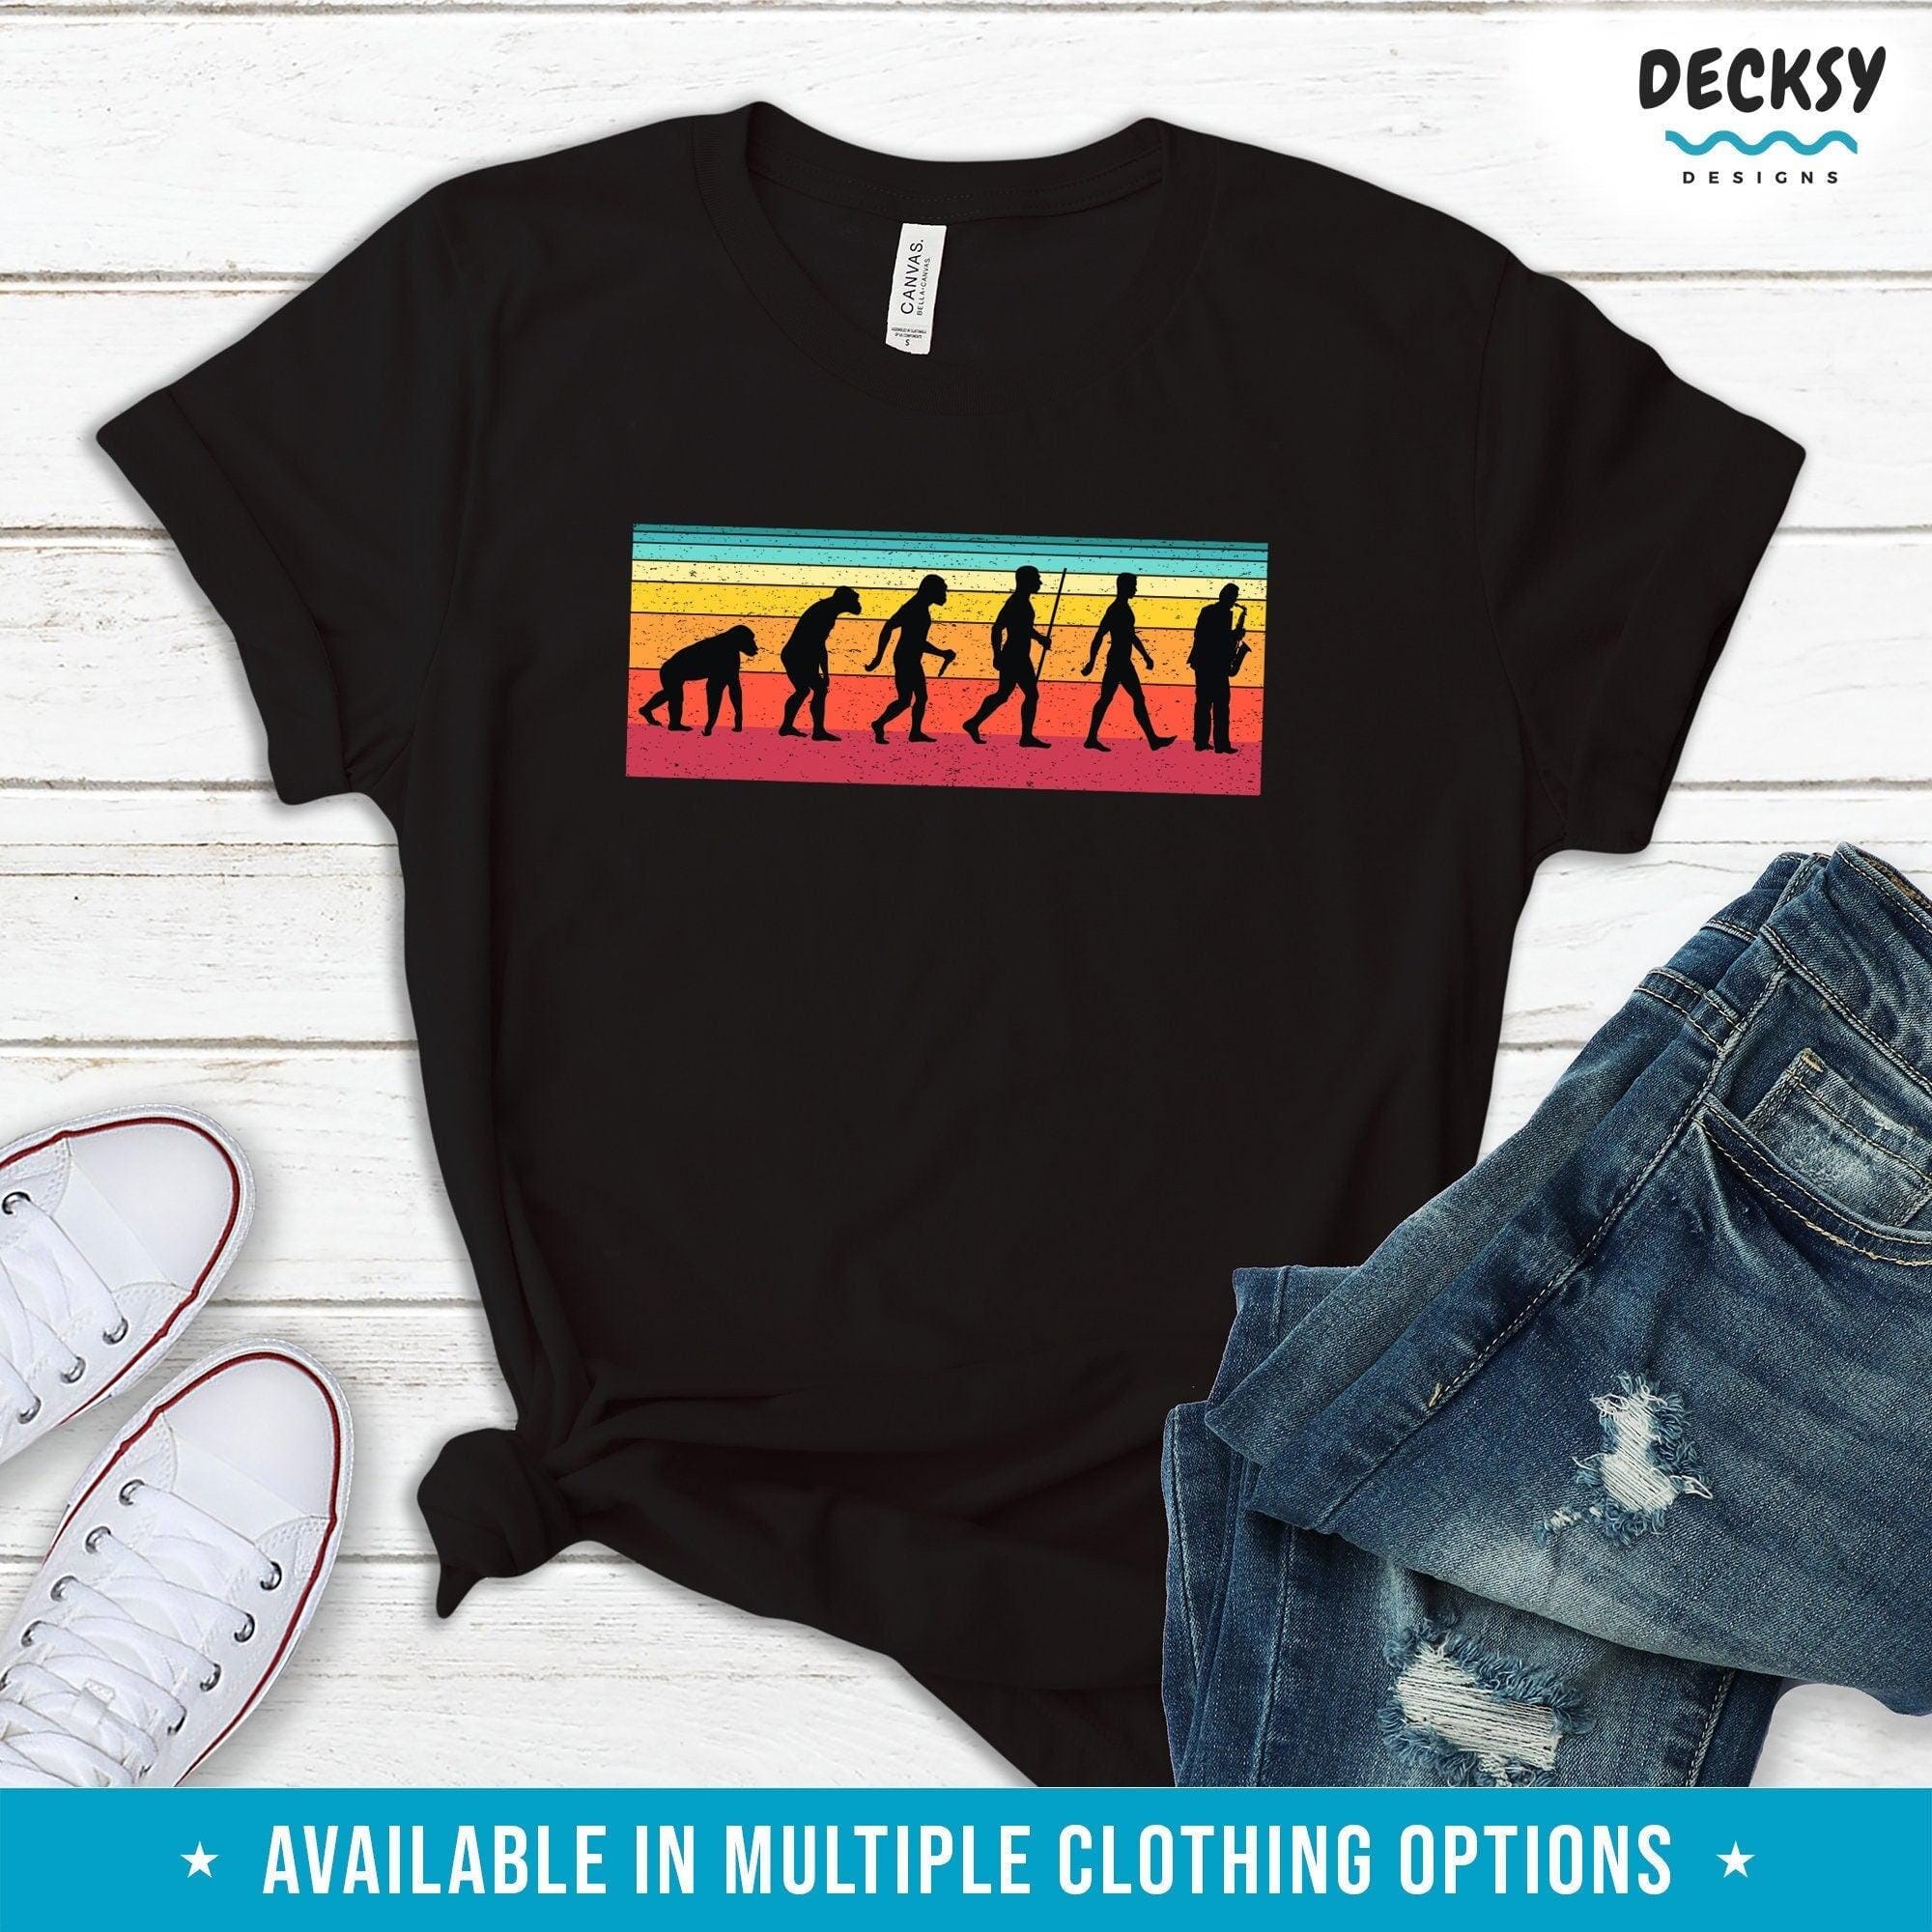 Saxophone Shirt, Gift For Jazz Fan-Clothing:Gender-Neutral Adult Clothing:Tops & Tees:T-shirts:Graphic Tees-DecksyDesigns